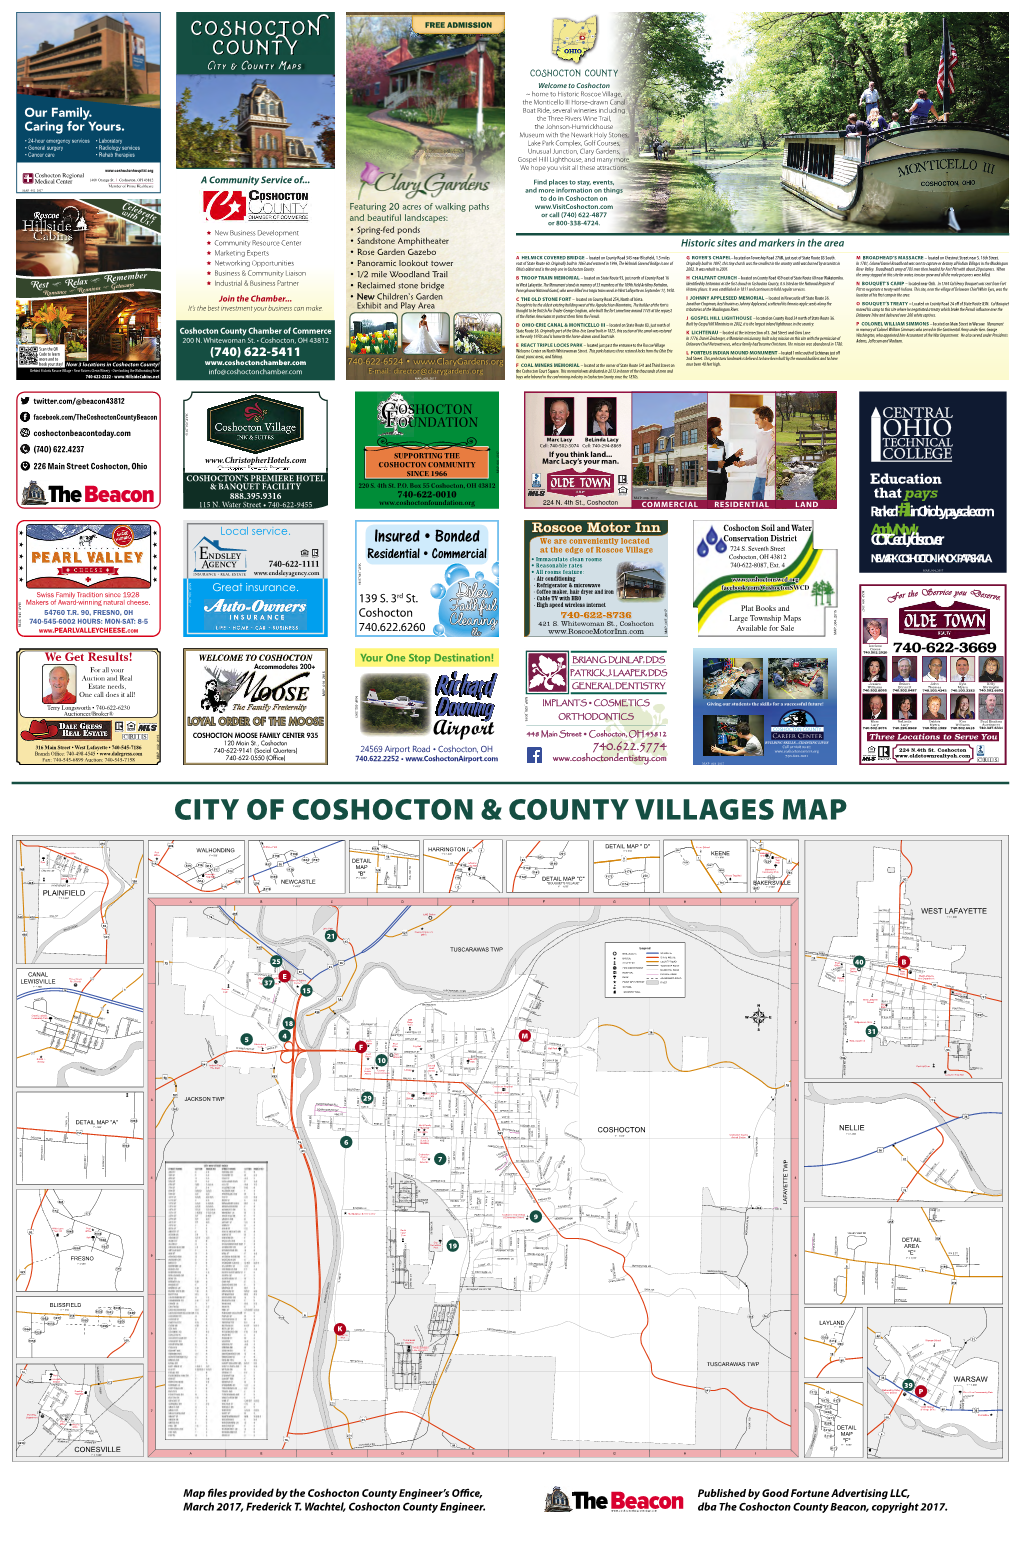 To Download a PDF File of the Coshocton Chamber of Commerce Map